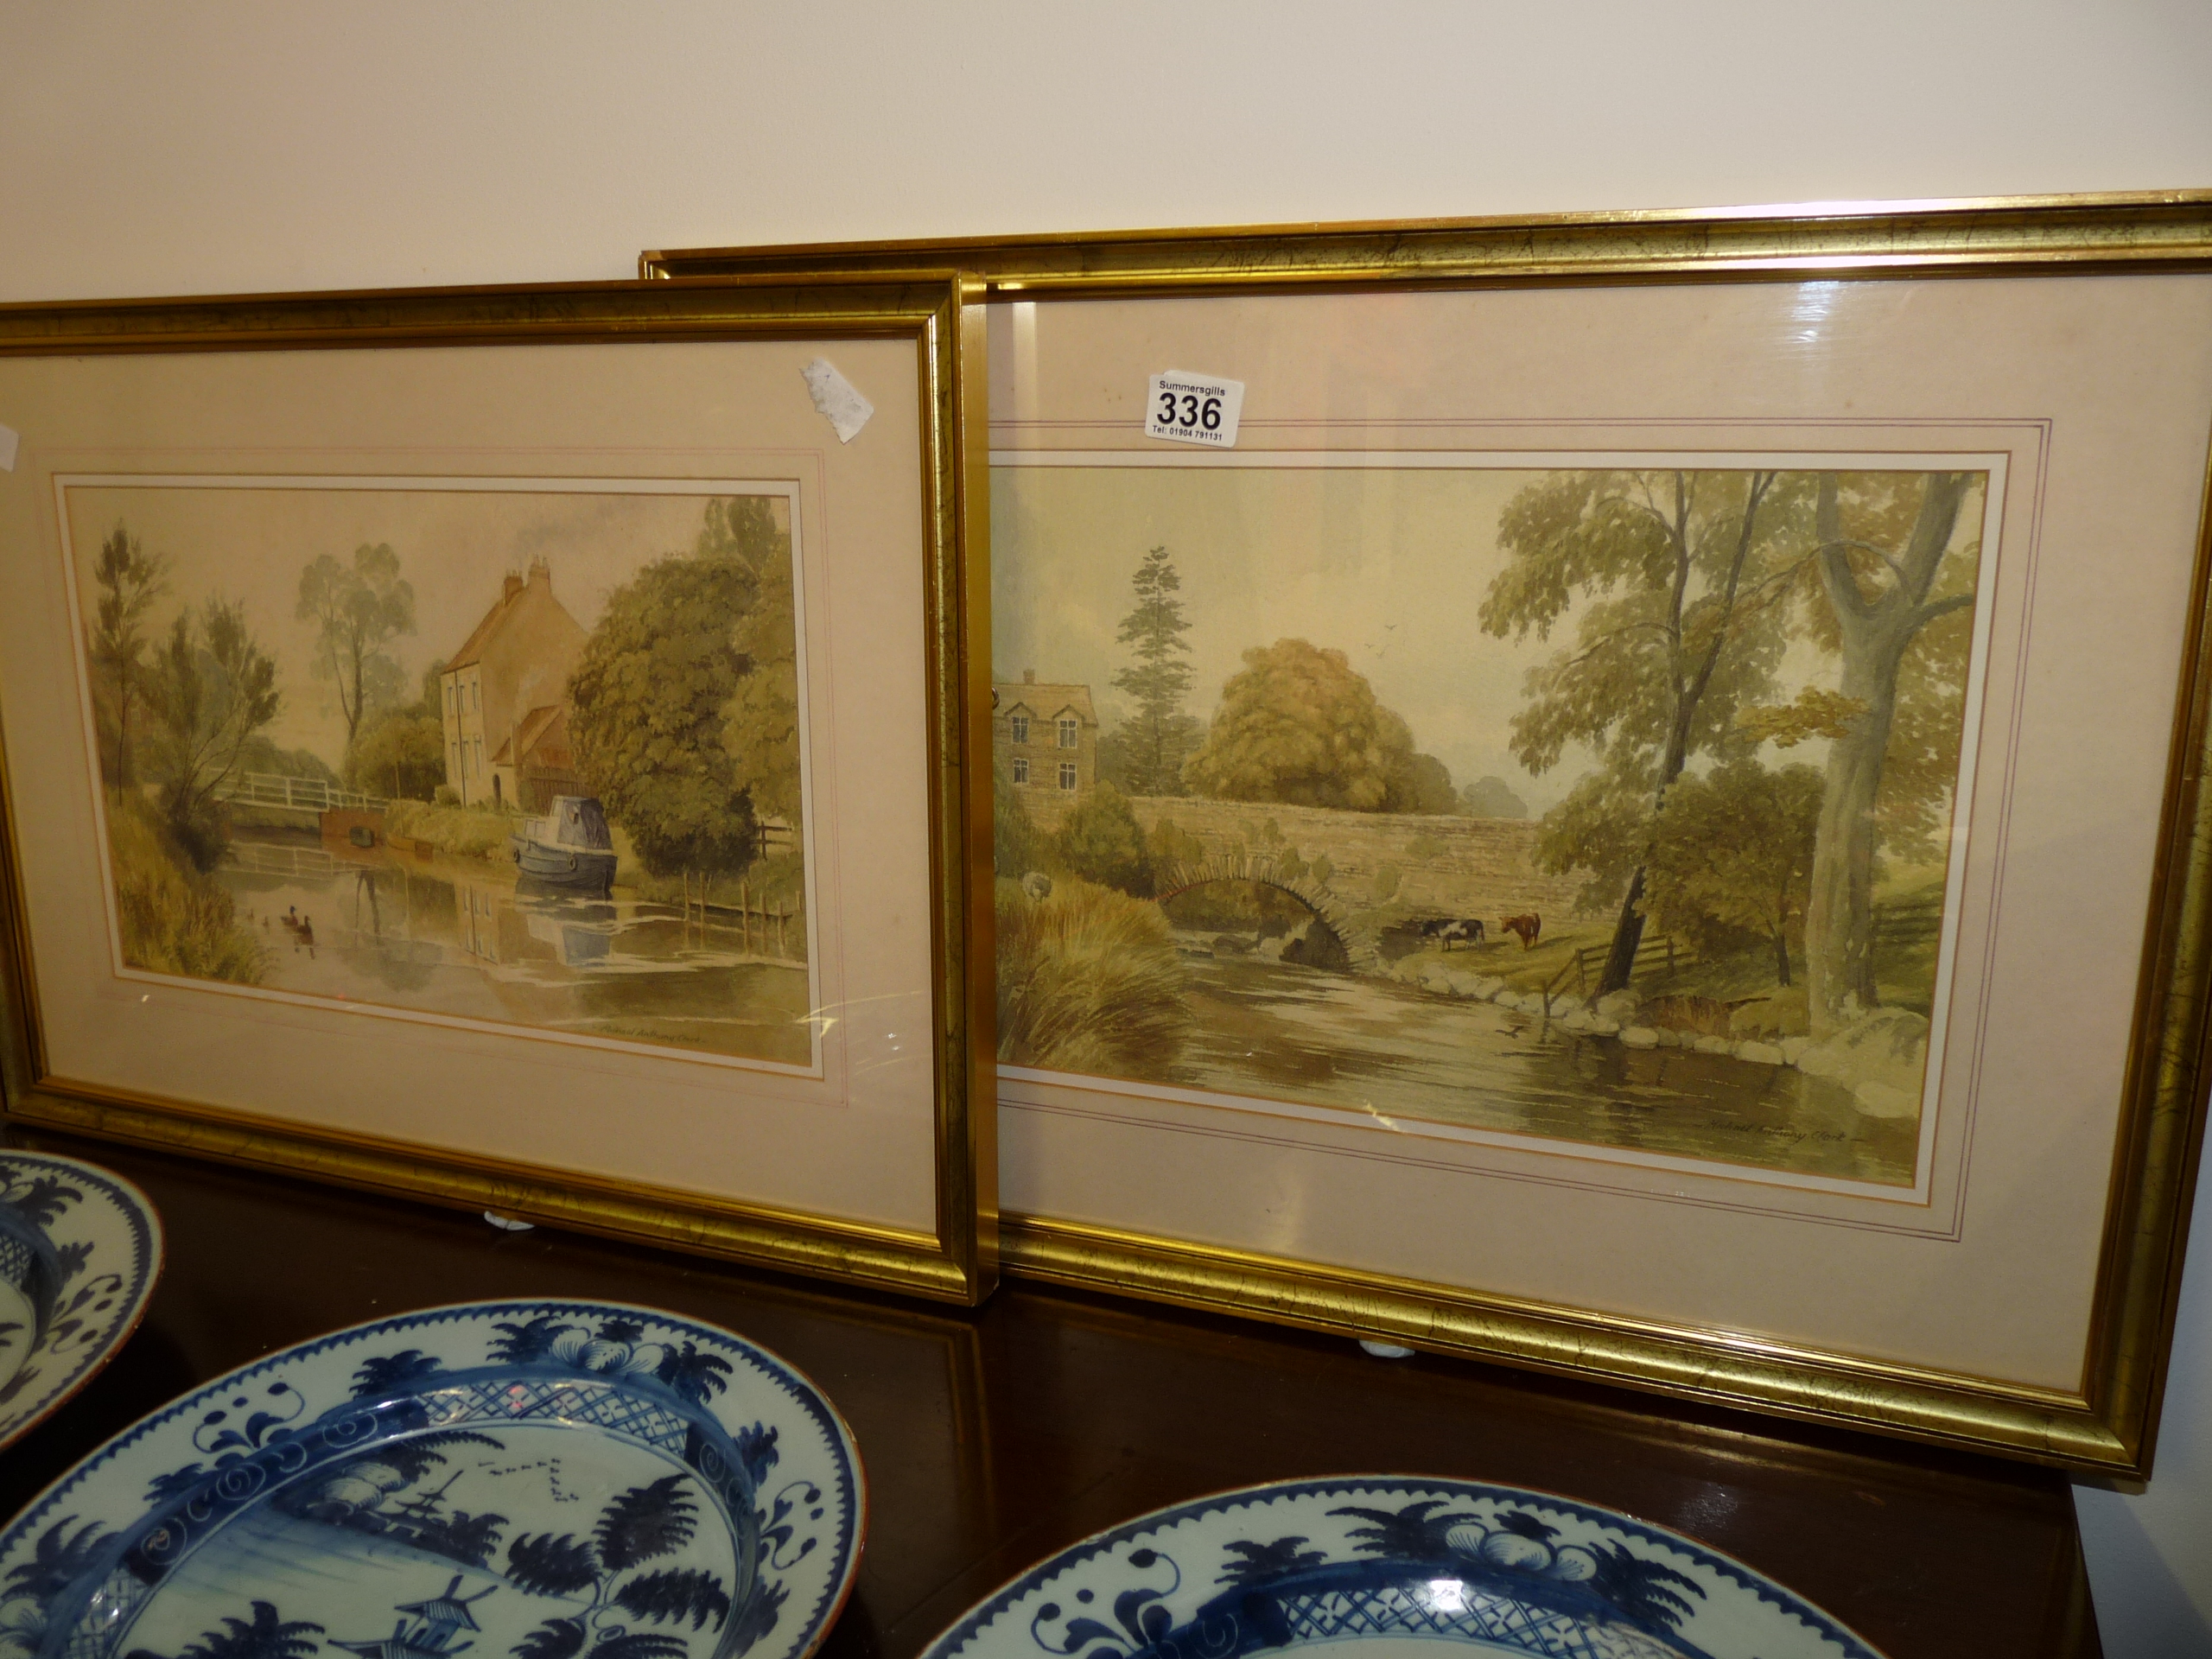 Pair of river scene watercolours by Michael Anthony Clark